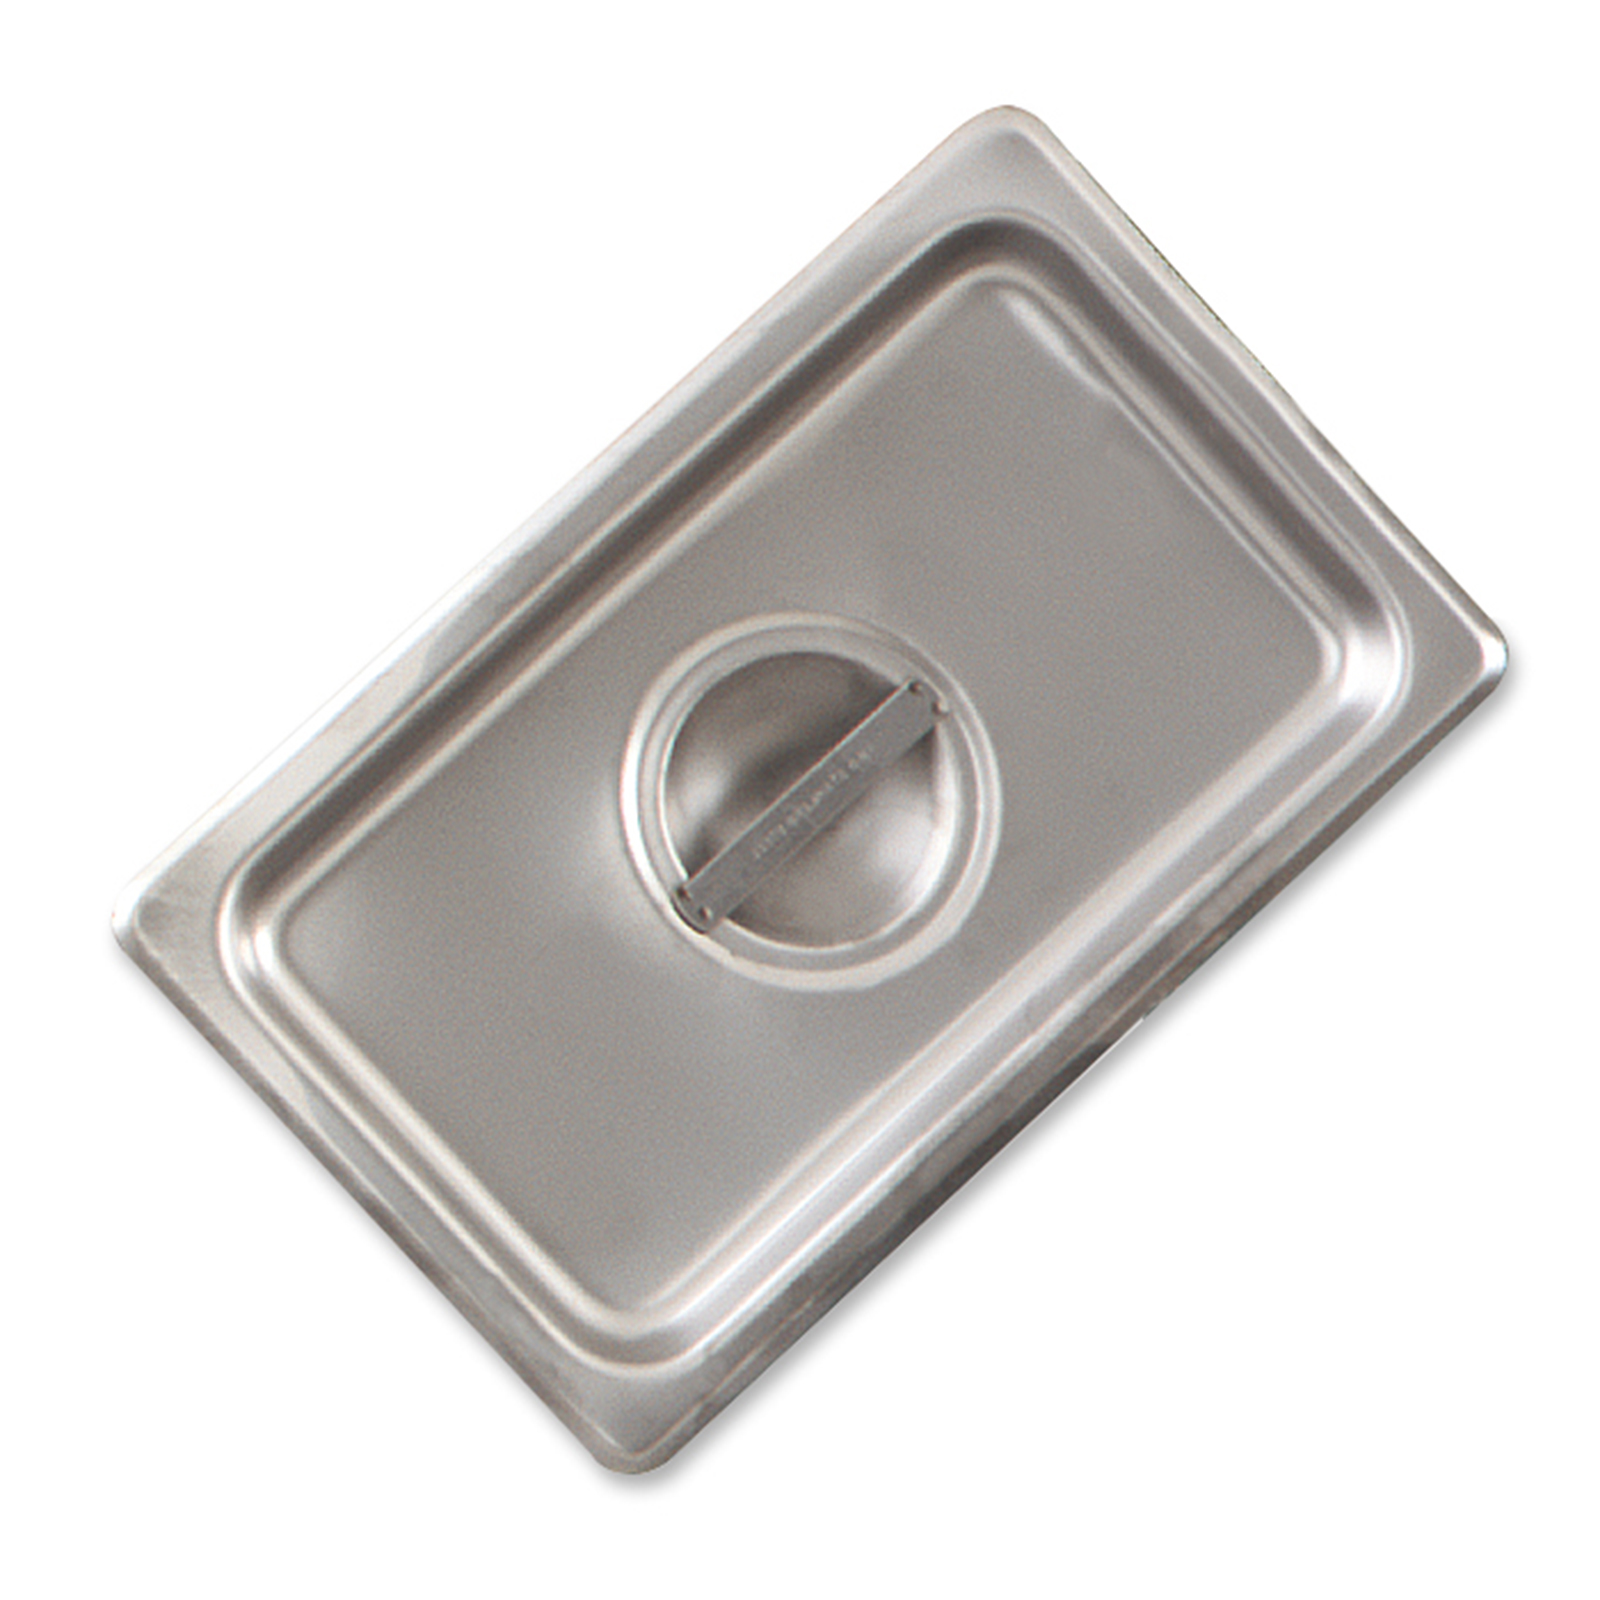 1/9 SIZE COVER FOR STEAM TABLE PANS